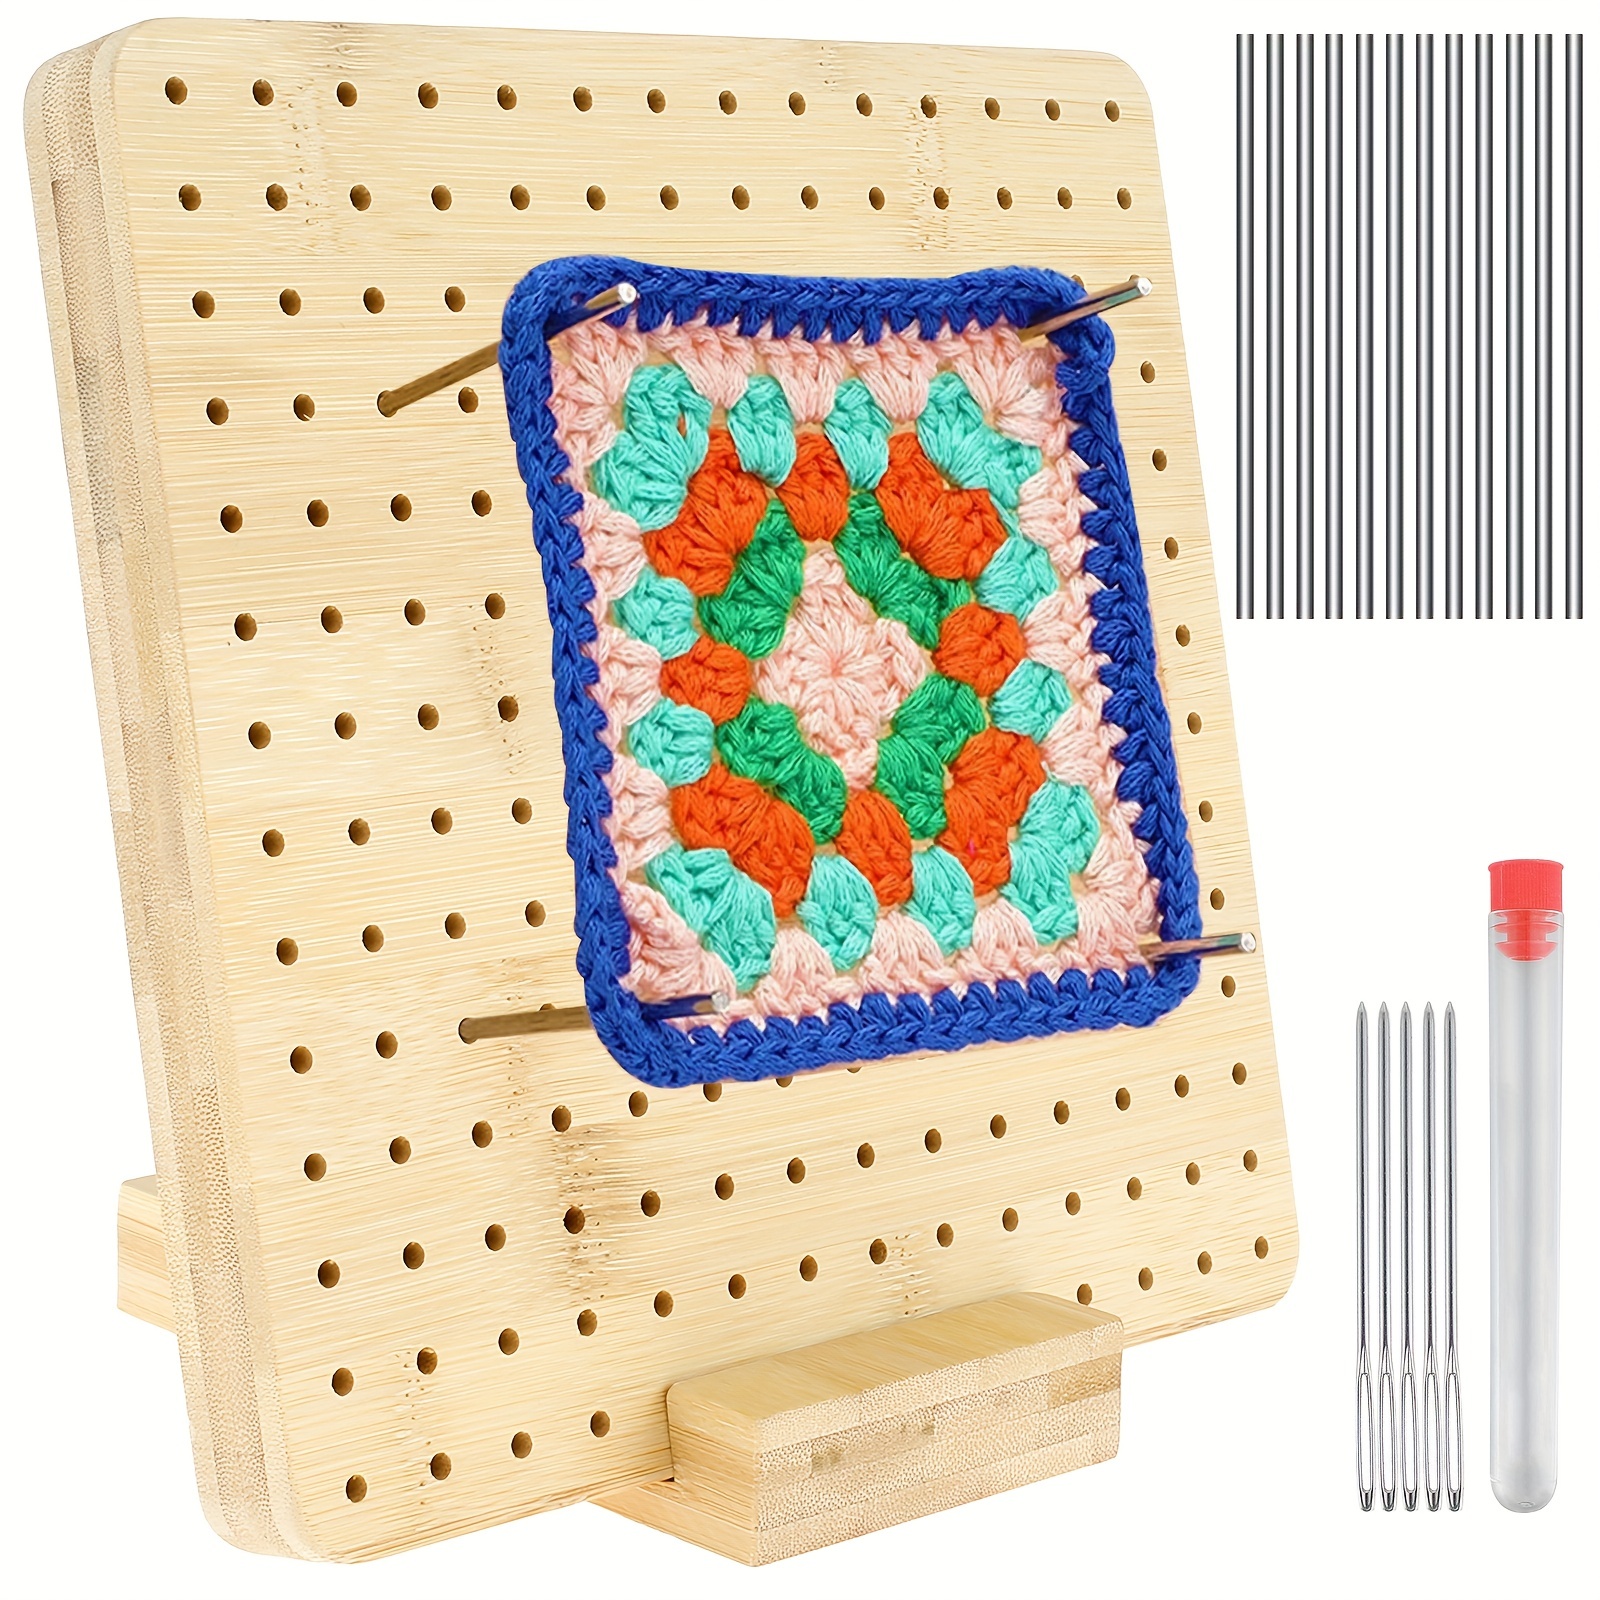 Crochet Blocking Board with 20 Steel Rod Bamboo Wooden Blocking Board with Base 5 Large Hole Needles Reusable Granny Square Blocking Board for